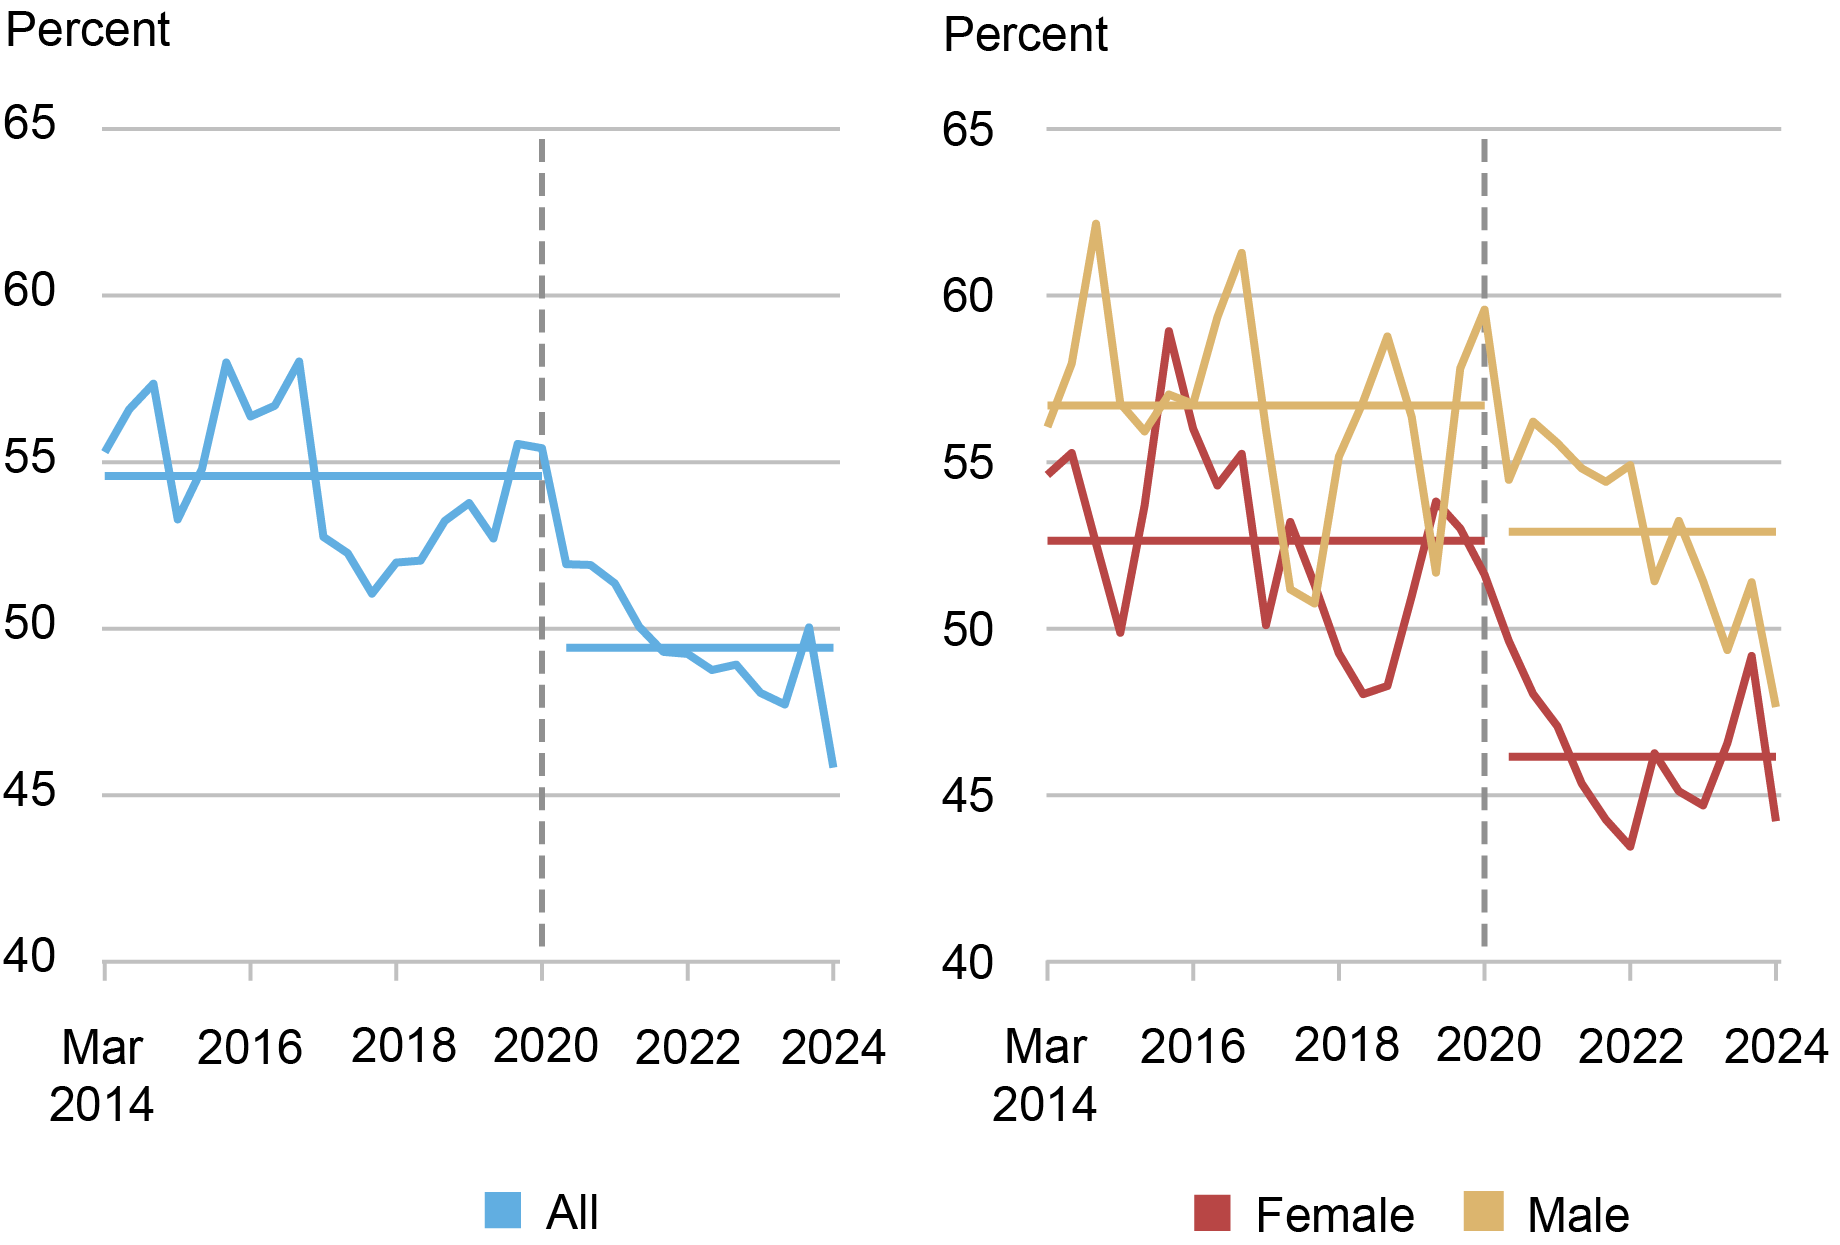 Two-panel figure, with a line chart on the left showing declines in expectations of working full-time past 62 for all respondents (light blue) and a line chart on the right showing the same for female (red) and male (gold) respondents, from March 2014 to March 2024. 